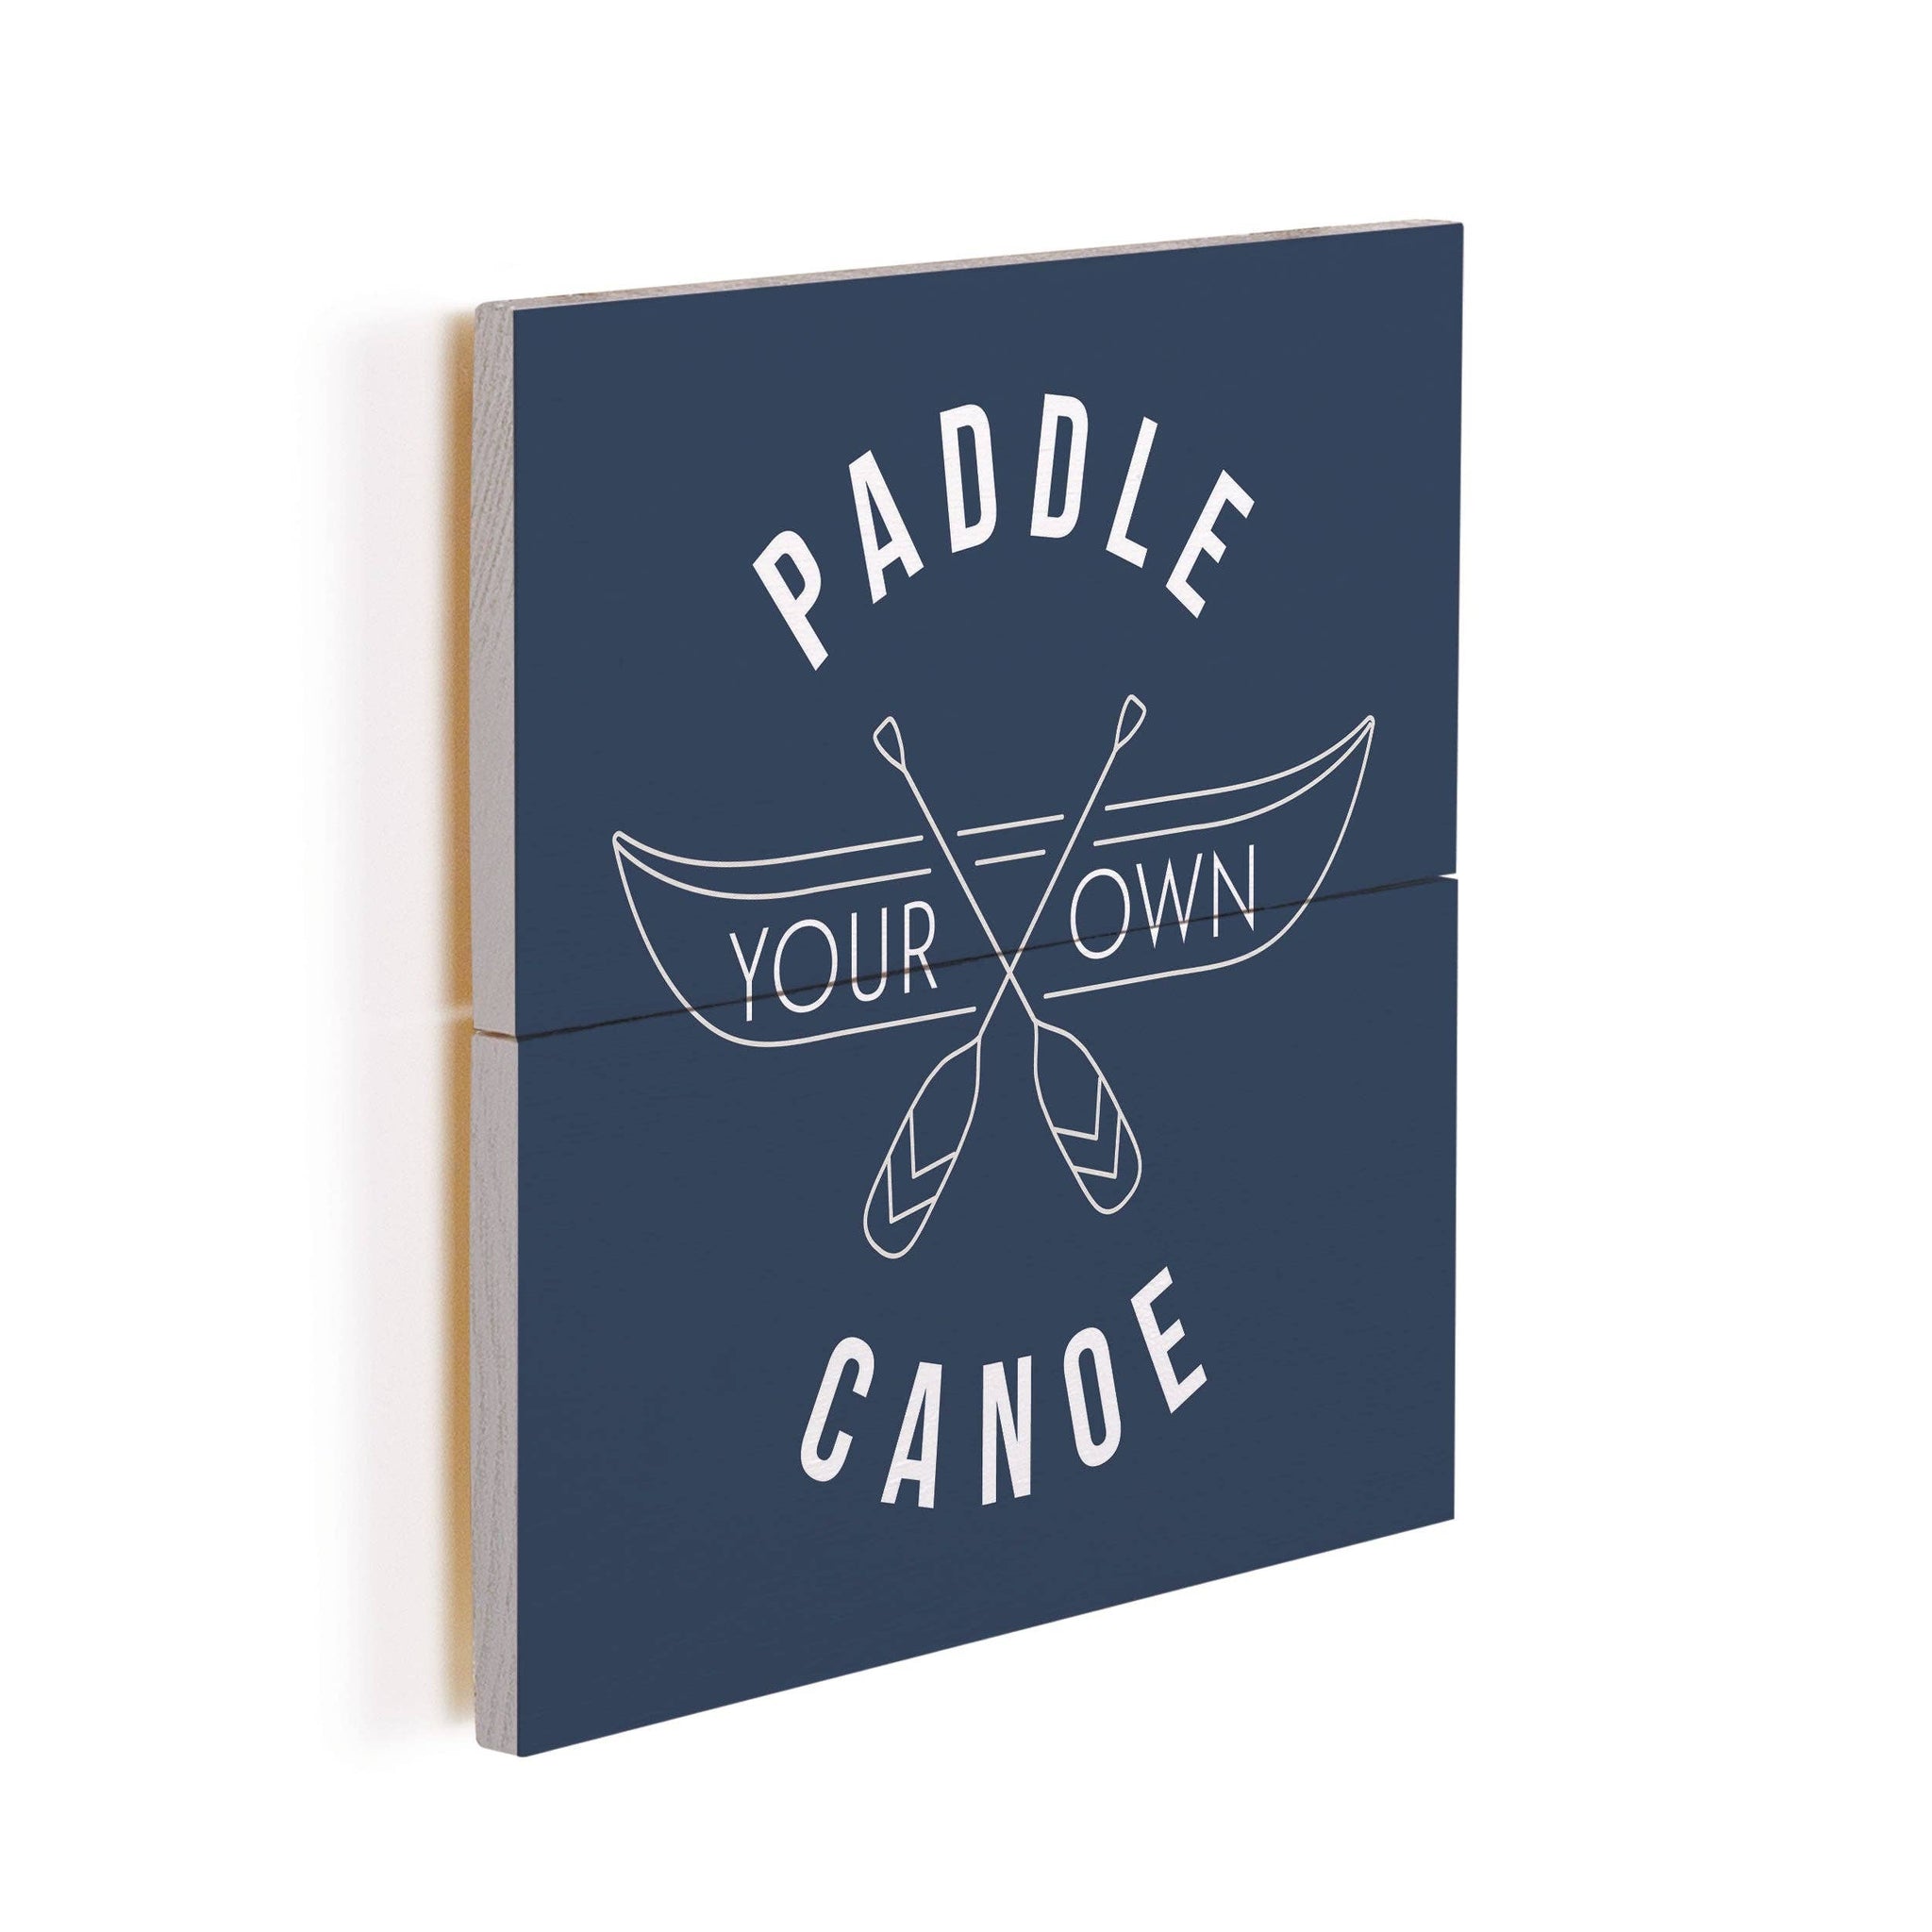 Paddle Your Own Canoe Wall Decor